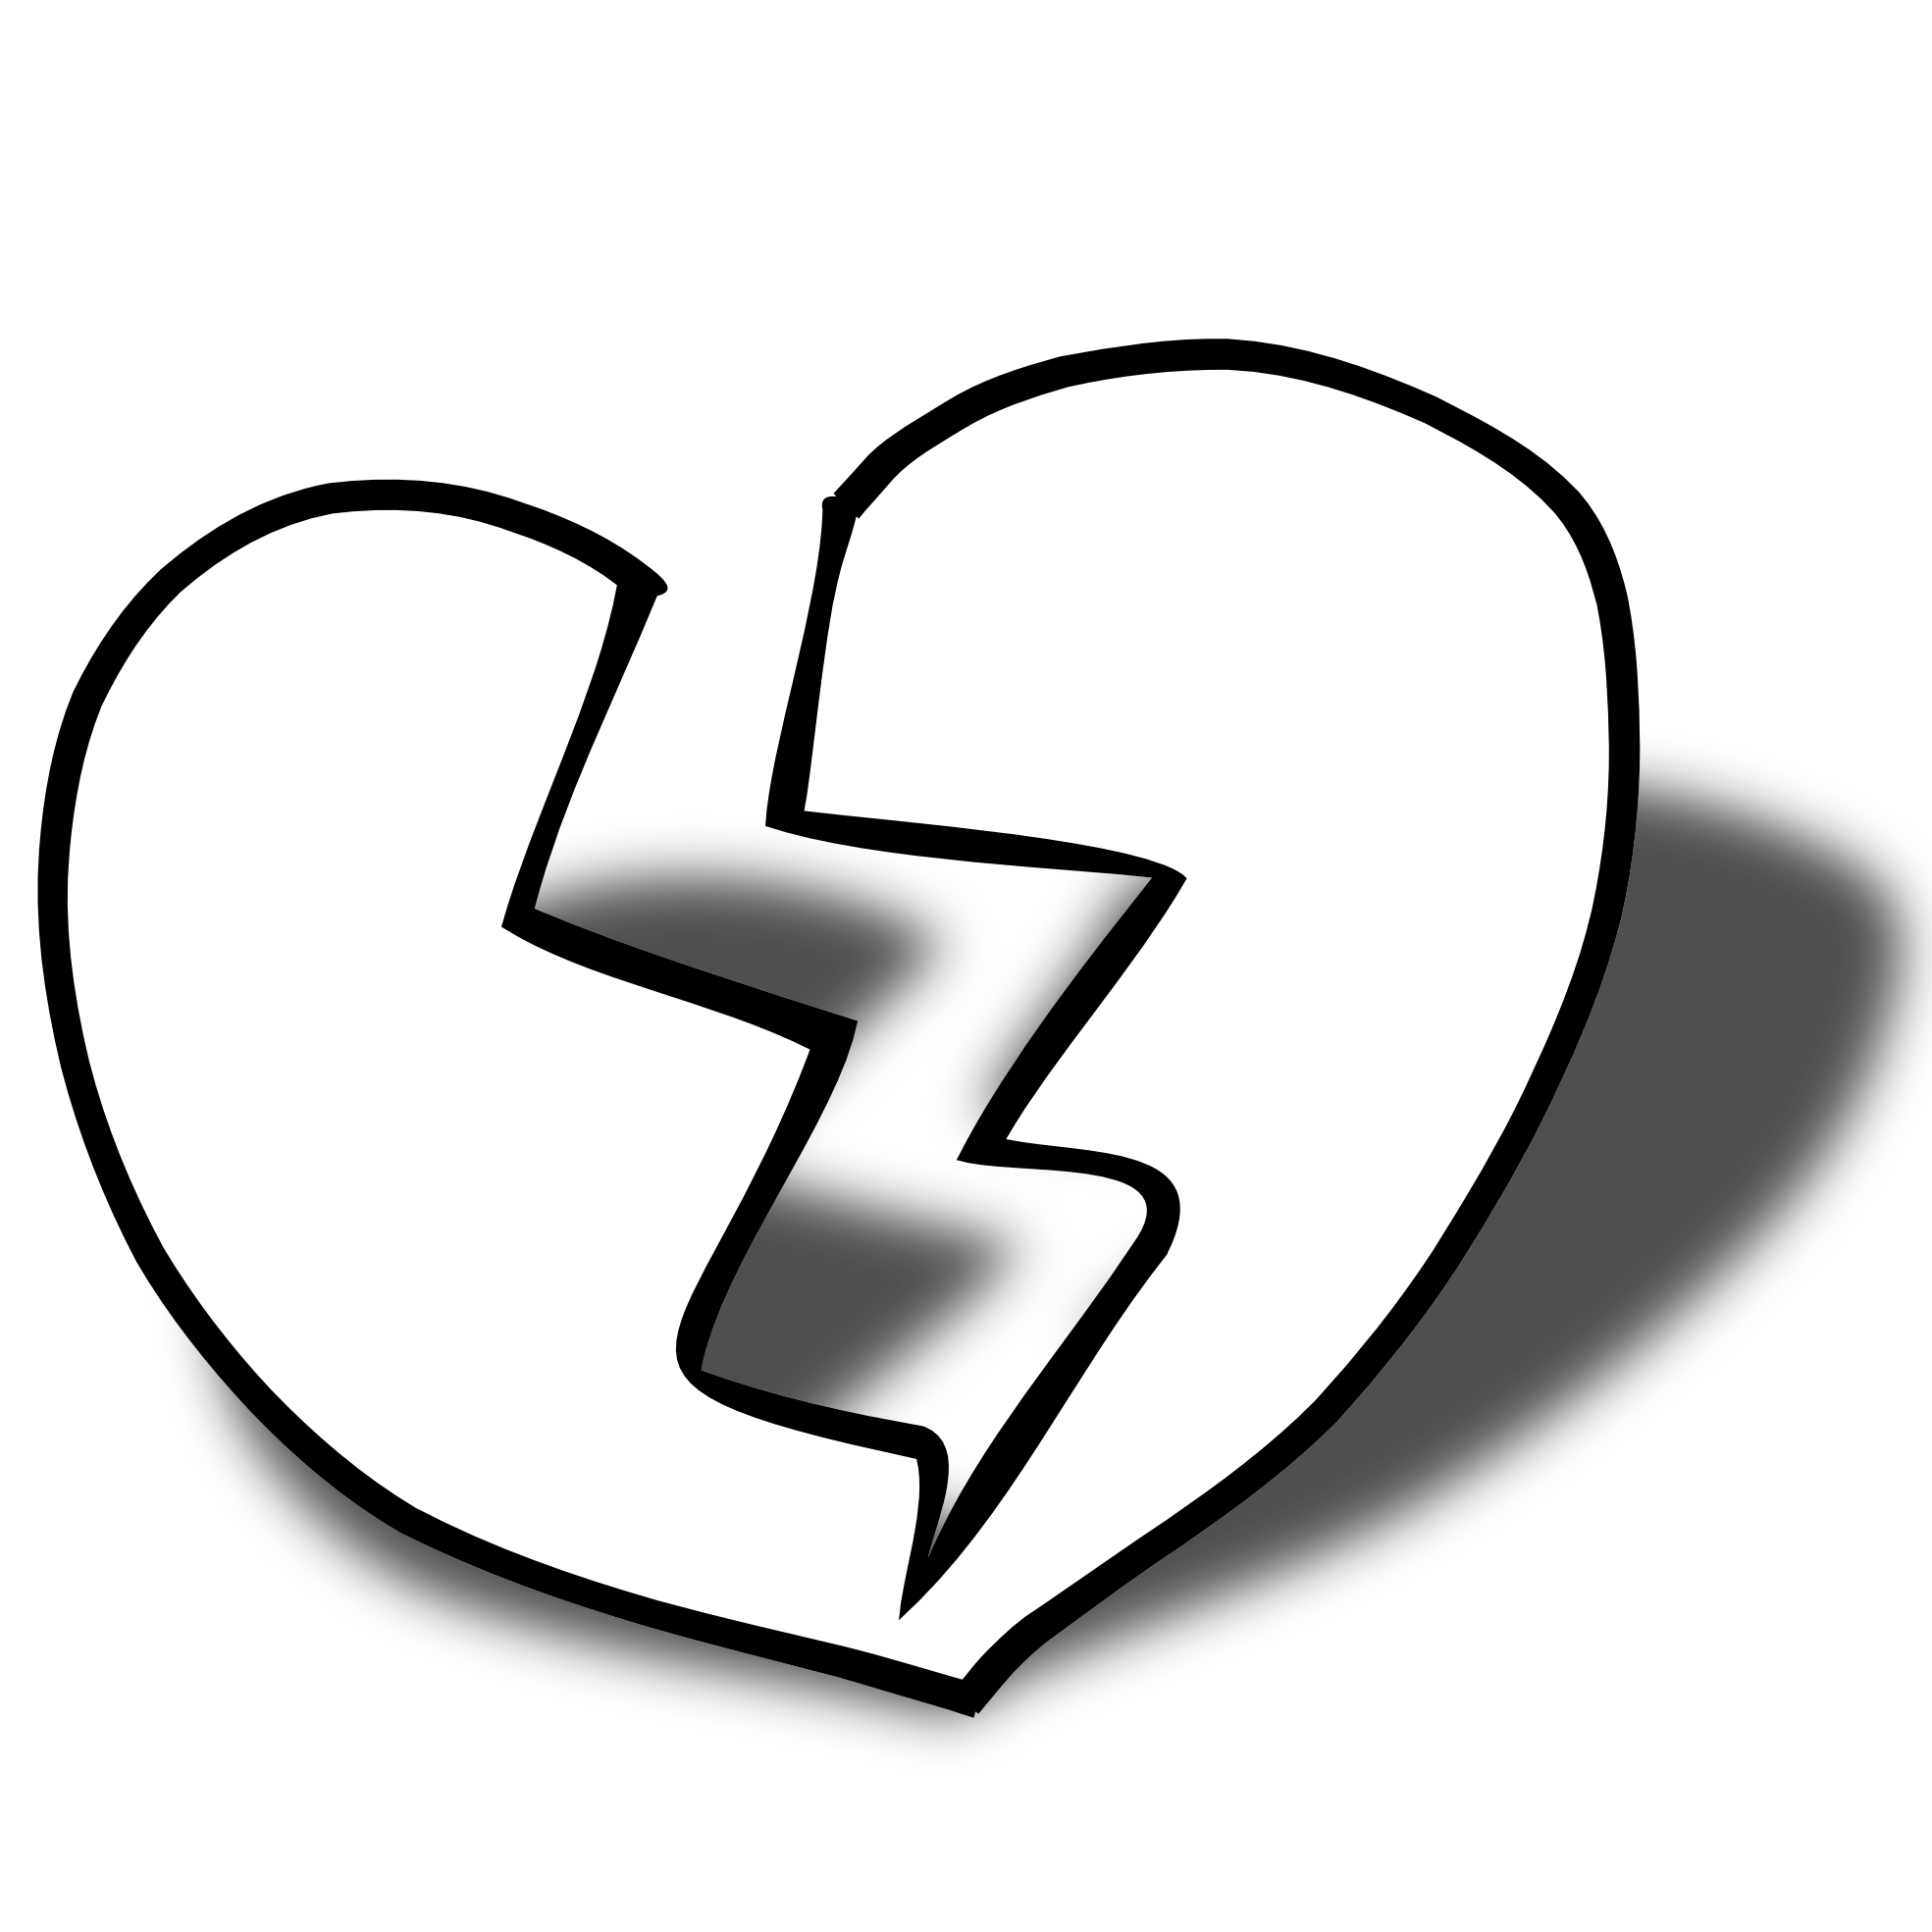 Human Heart Clipart Black And White - ClipArt Best